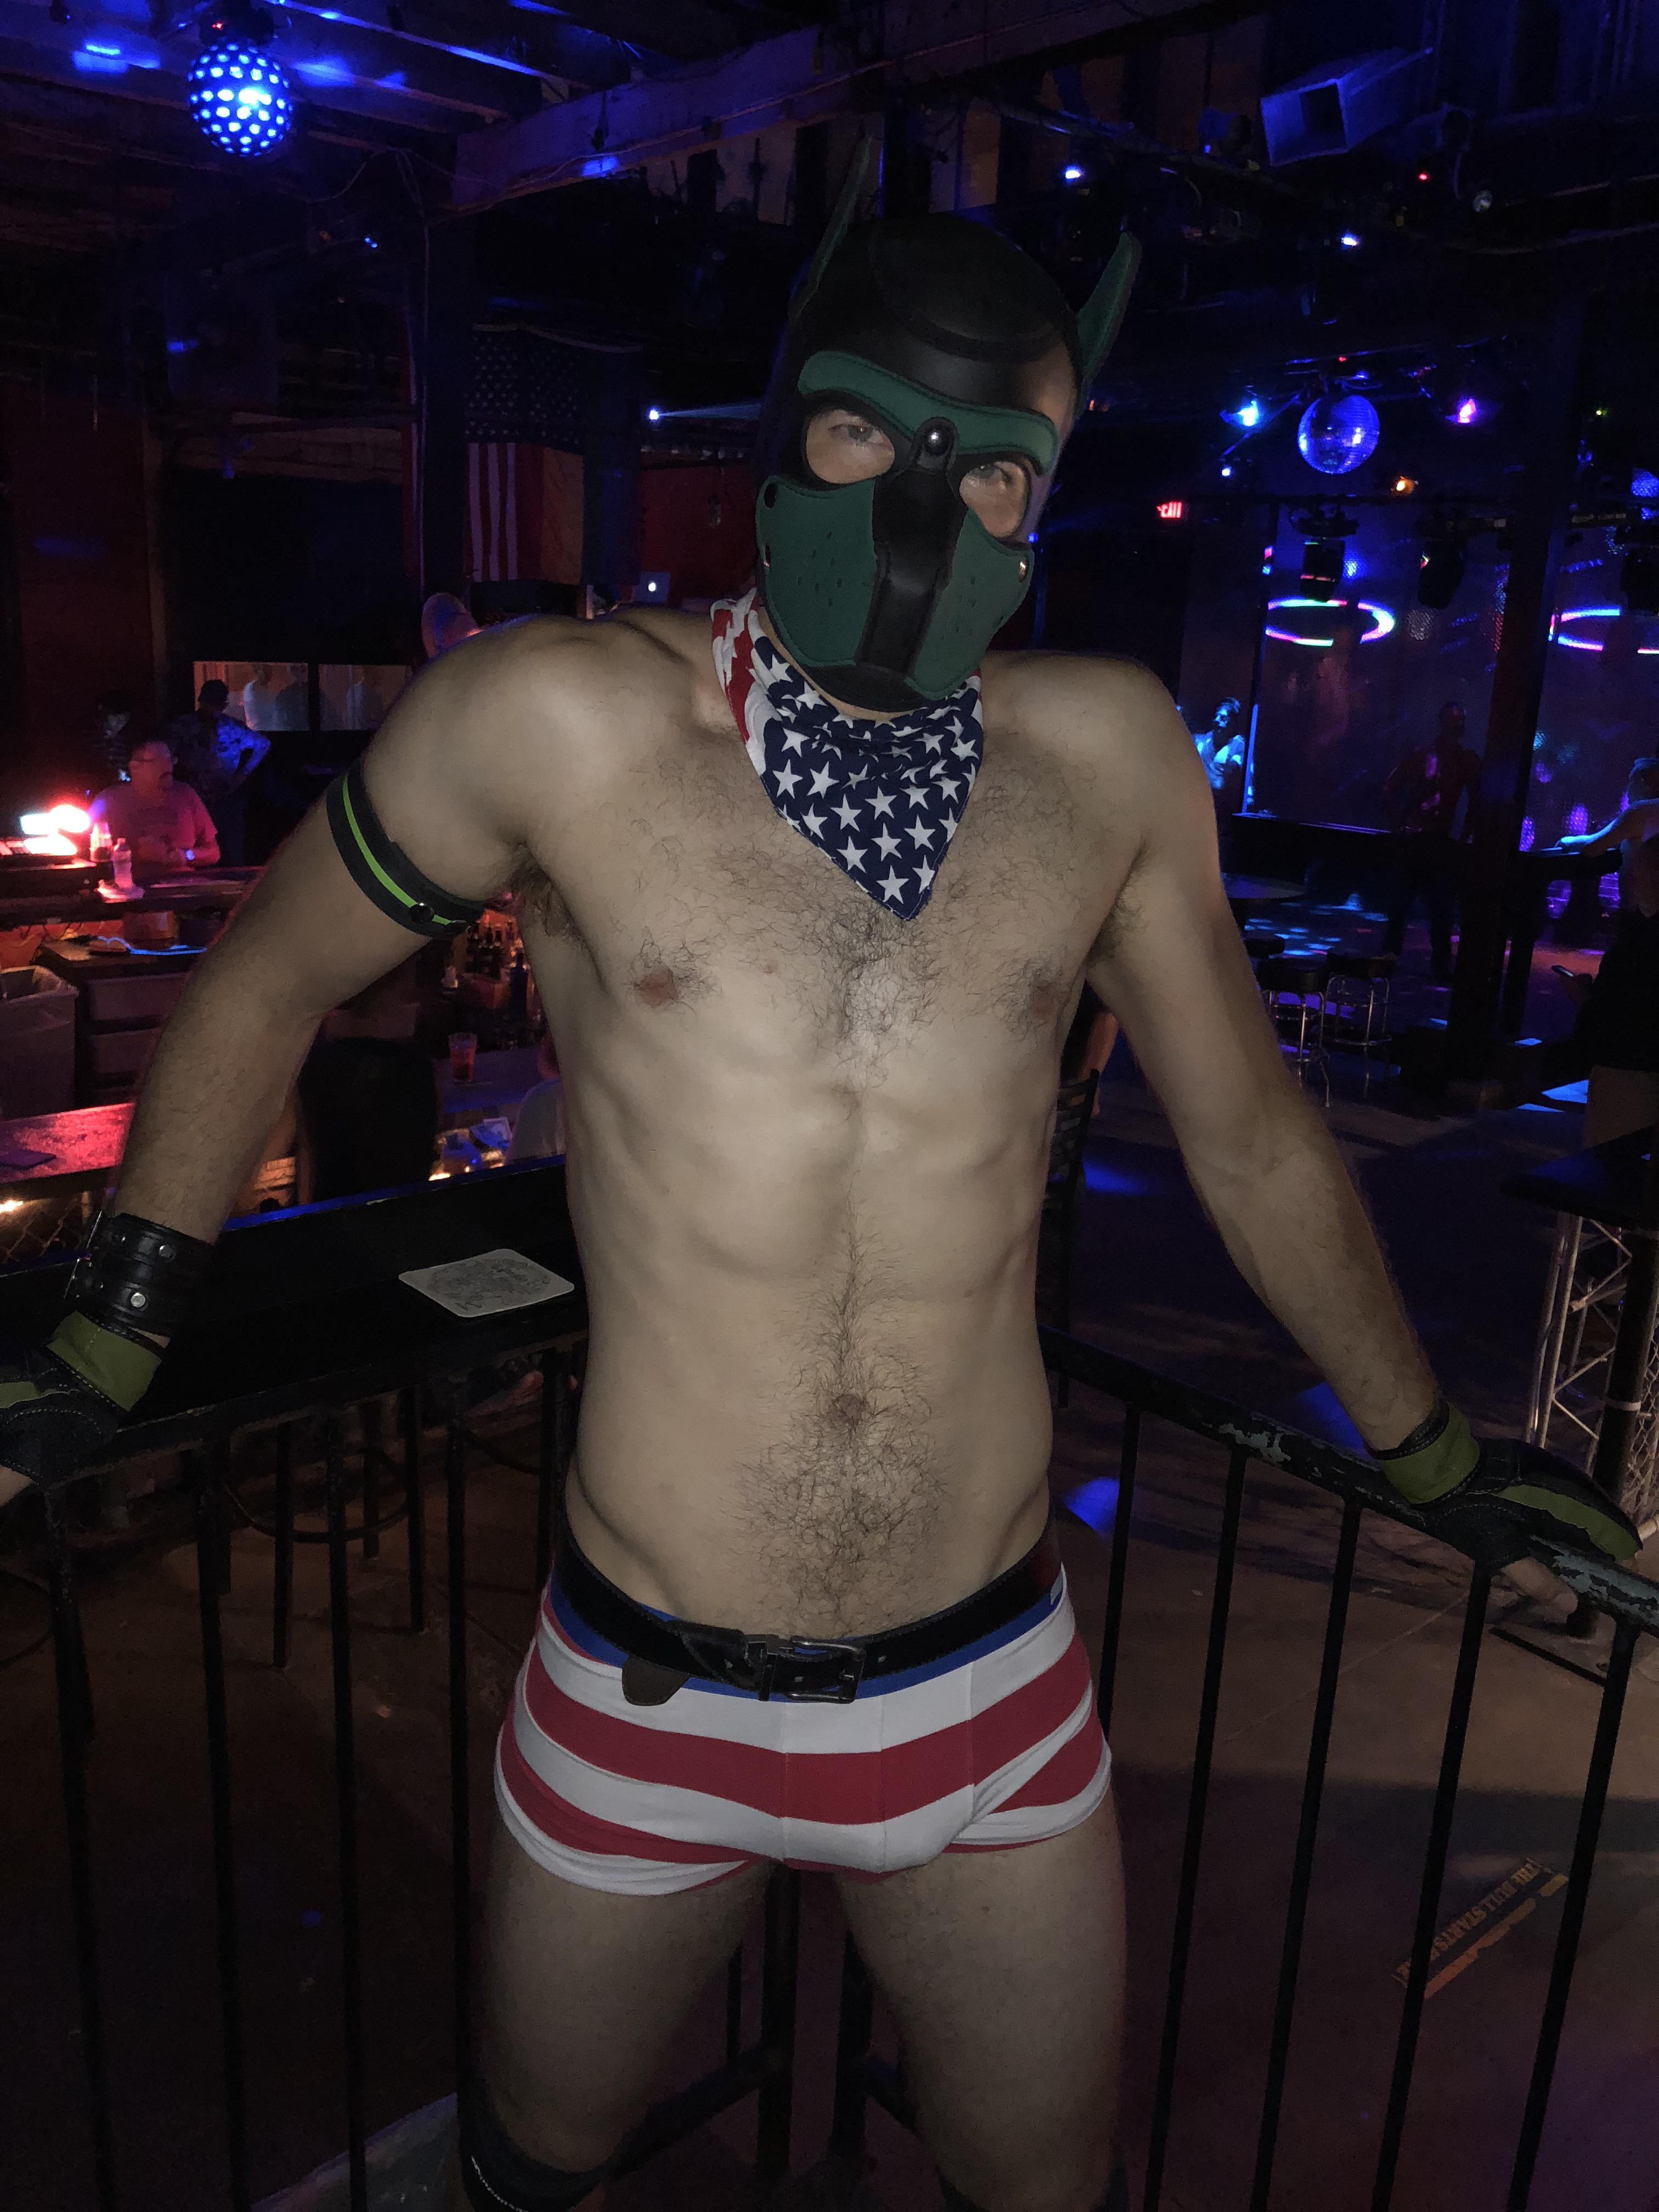 Hope all you American kinksters got a chance to vote yesterday!